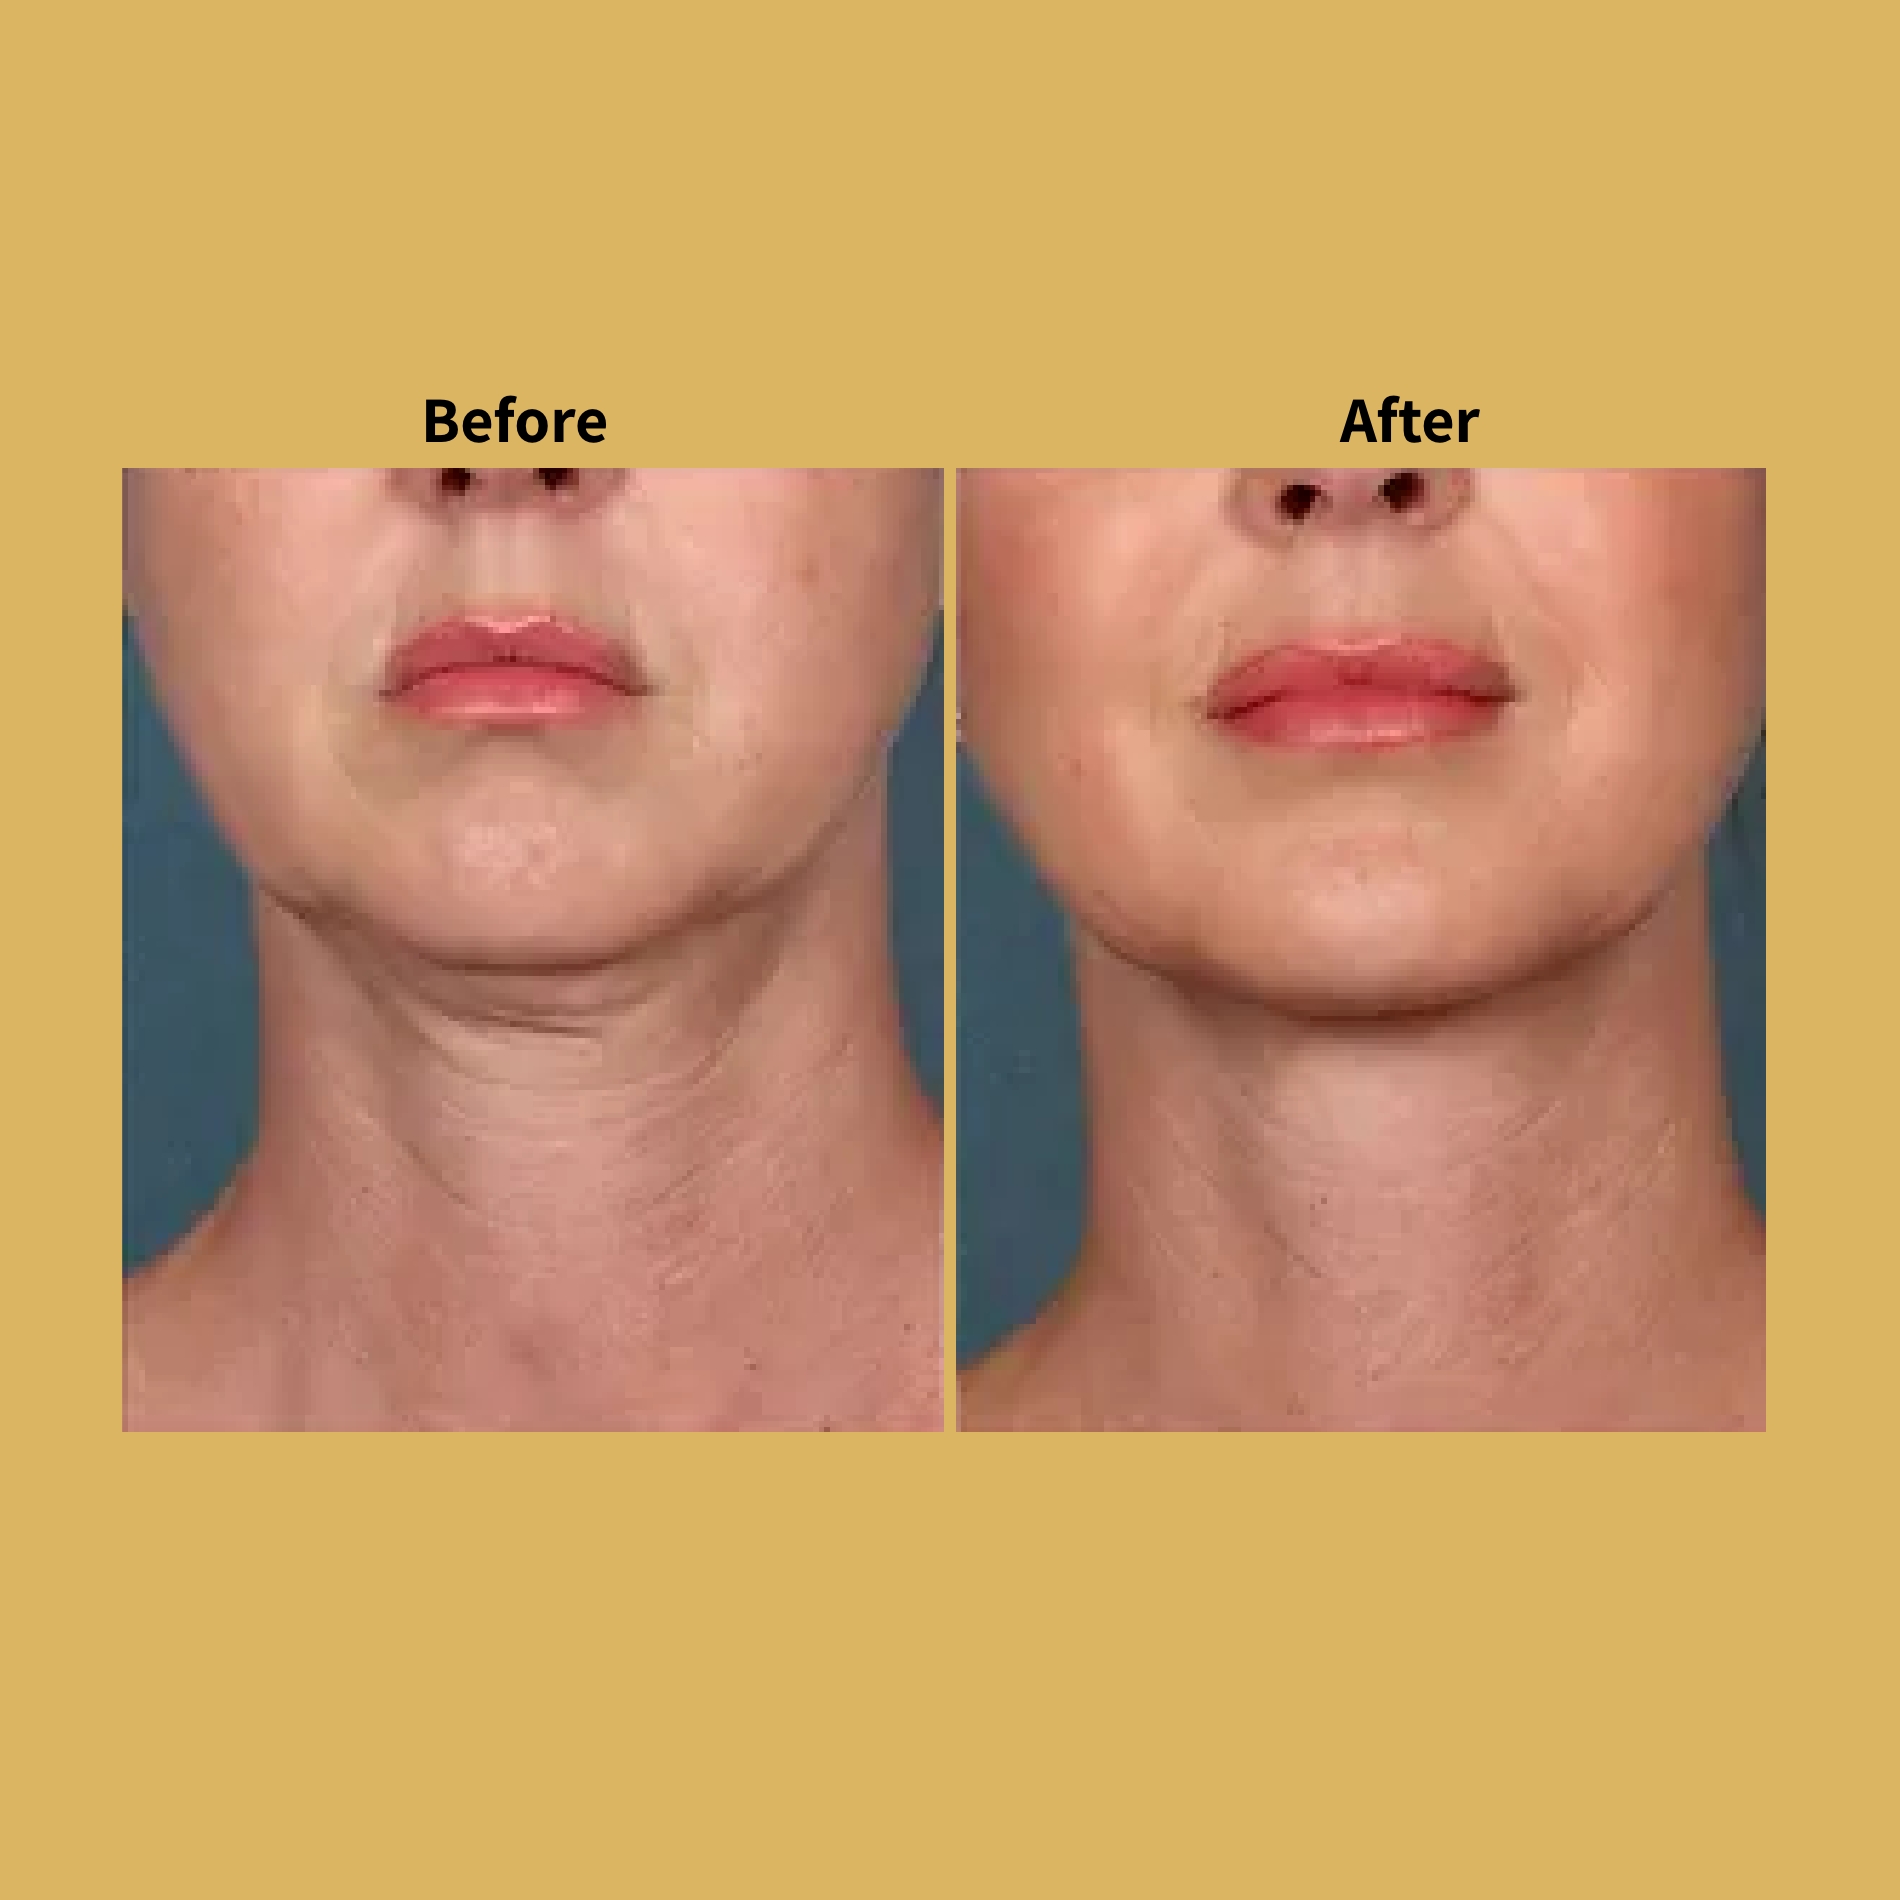 Laser Rejuvenation Before and After Treatment Photos | Soleil Medical & Beauty Spa in Portland, OR